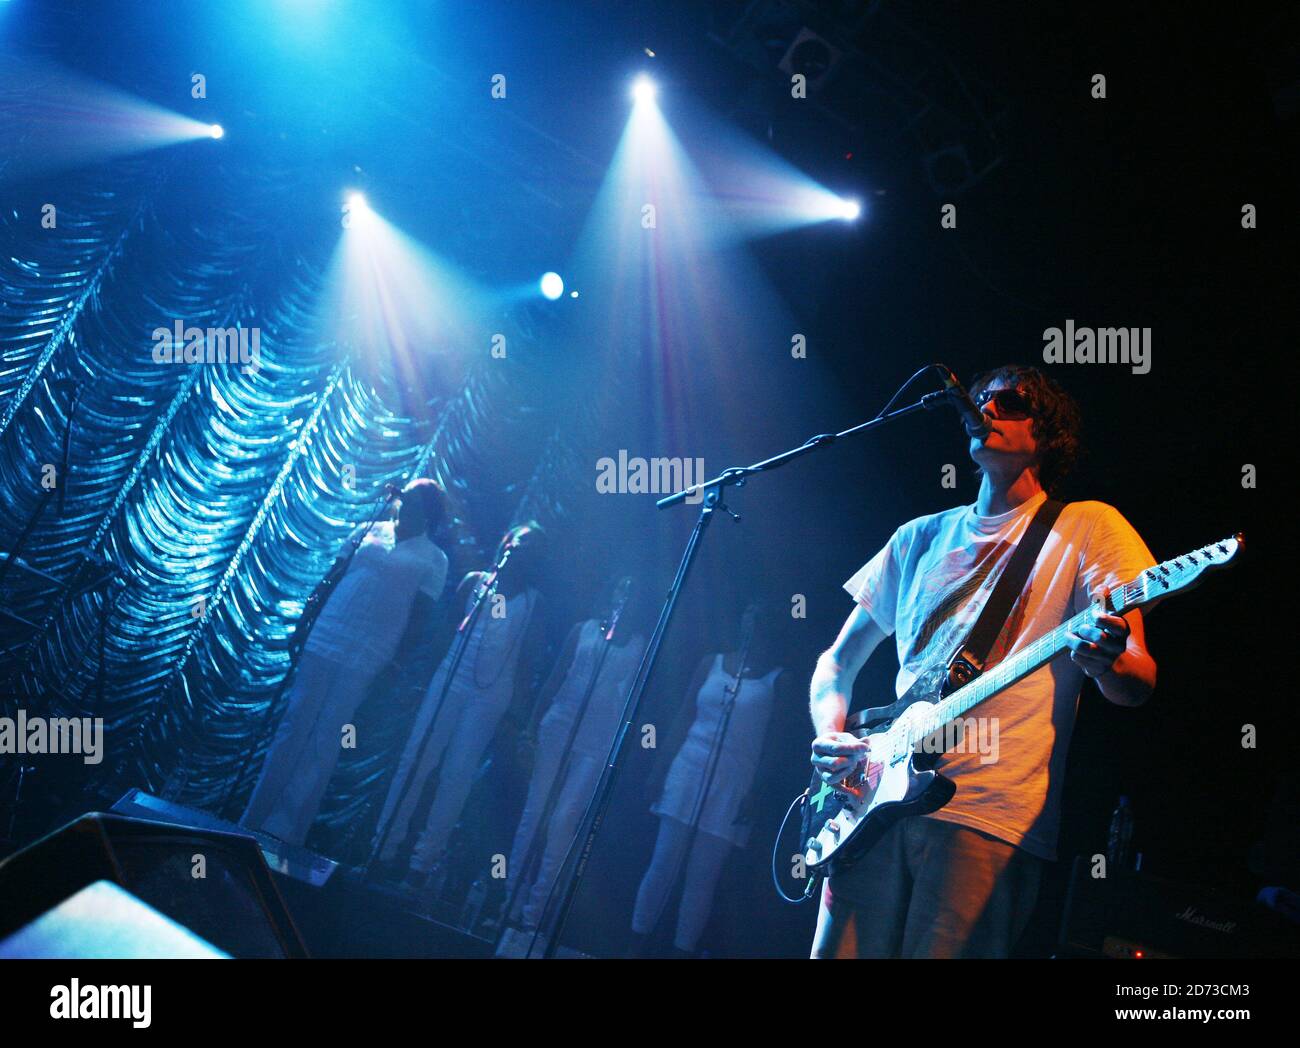 Jason Pierce of Spiritualized with backing singers in concert at Koko in Camden, north London. Stock Photo